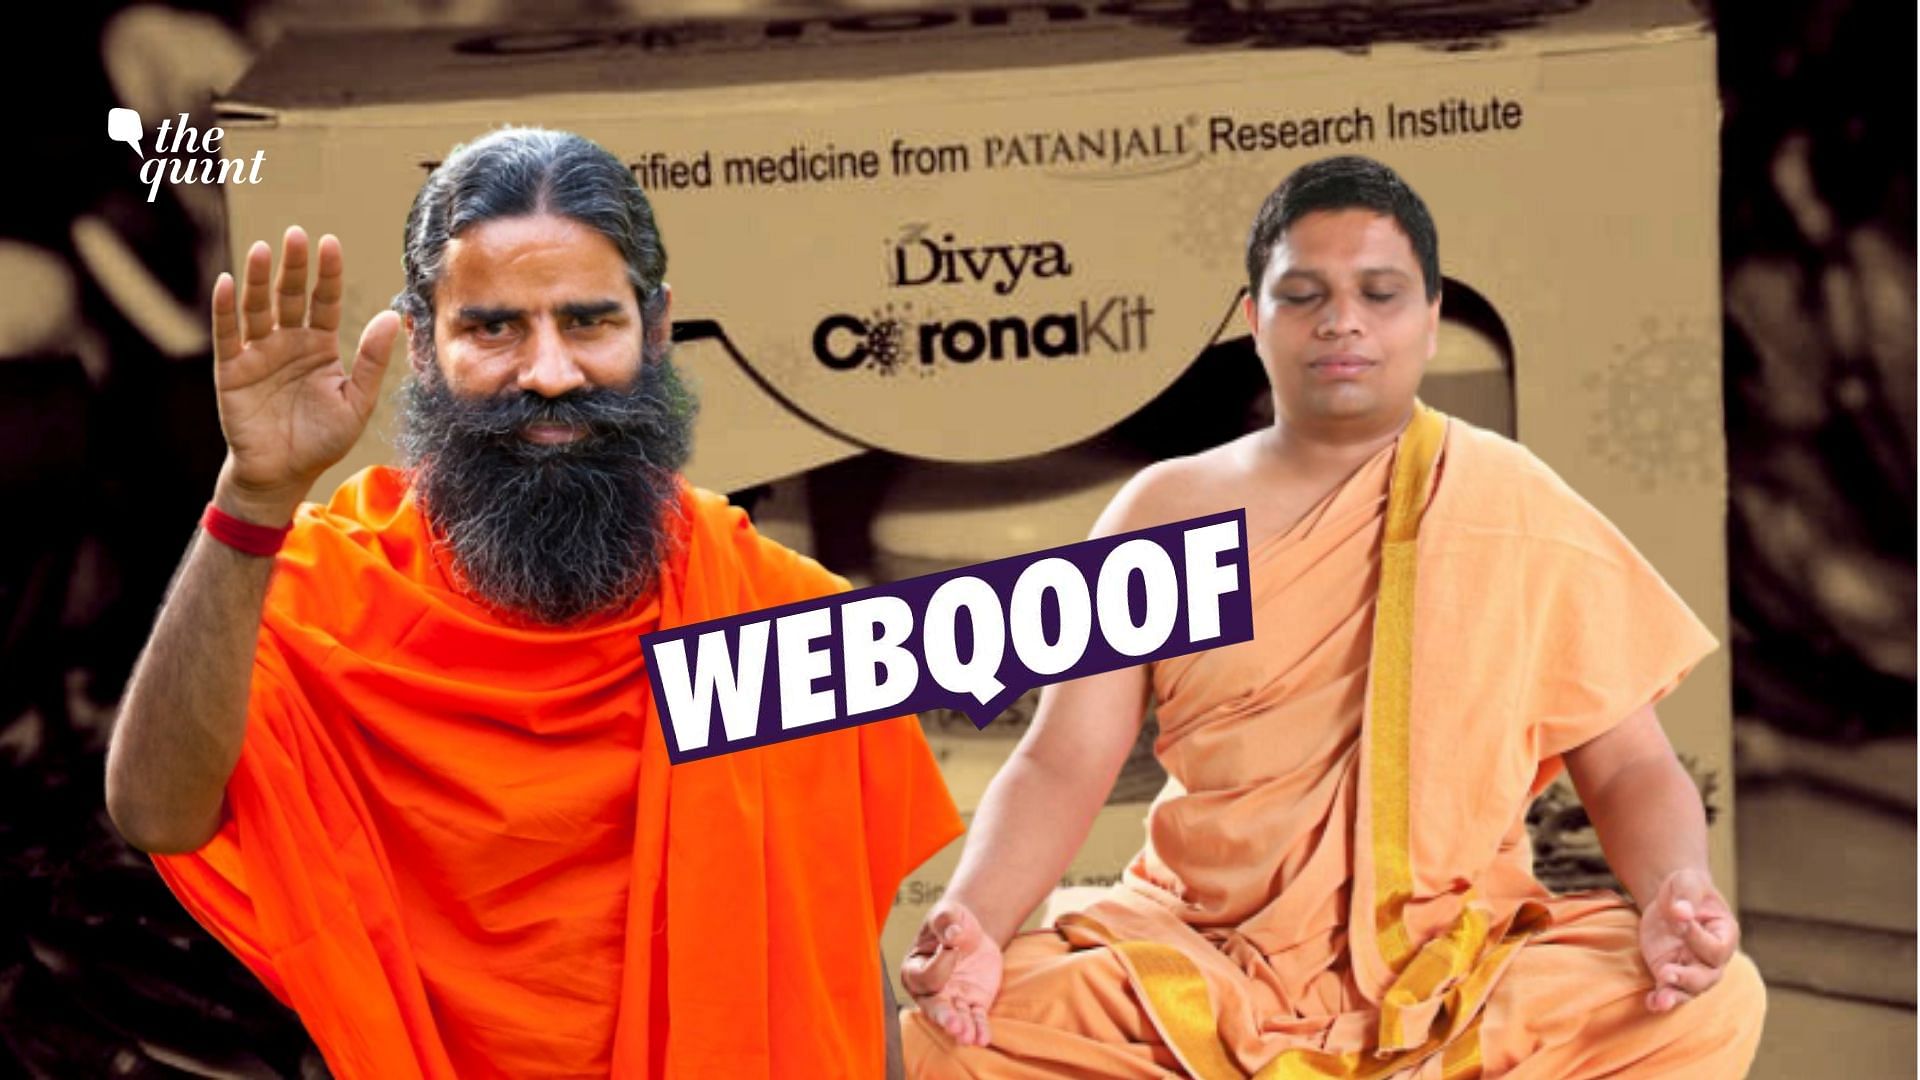 Patanjali on Tuesday, 23 May launched <a href="https://fit.thequint.com/coronavirus/ramdev-launches-ayurvedic-drug-coronil-claims-it-can-treat-covid">‘Coronil and Swasari’</a>, touted by company’s founder Baba Ramdev as a cure for COVID-19.